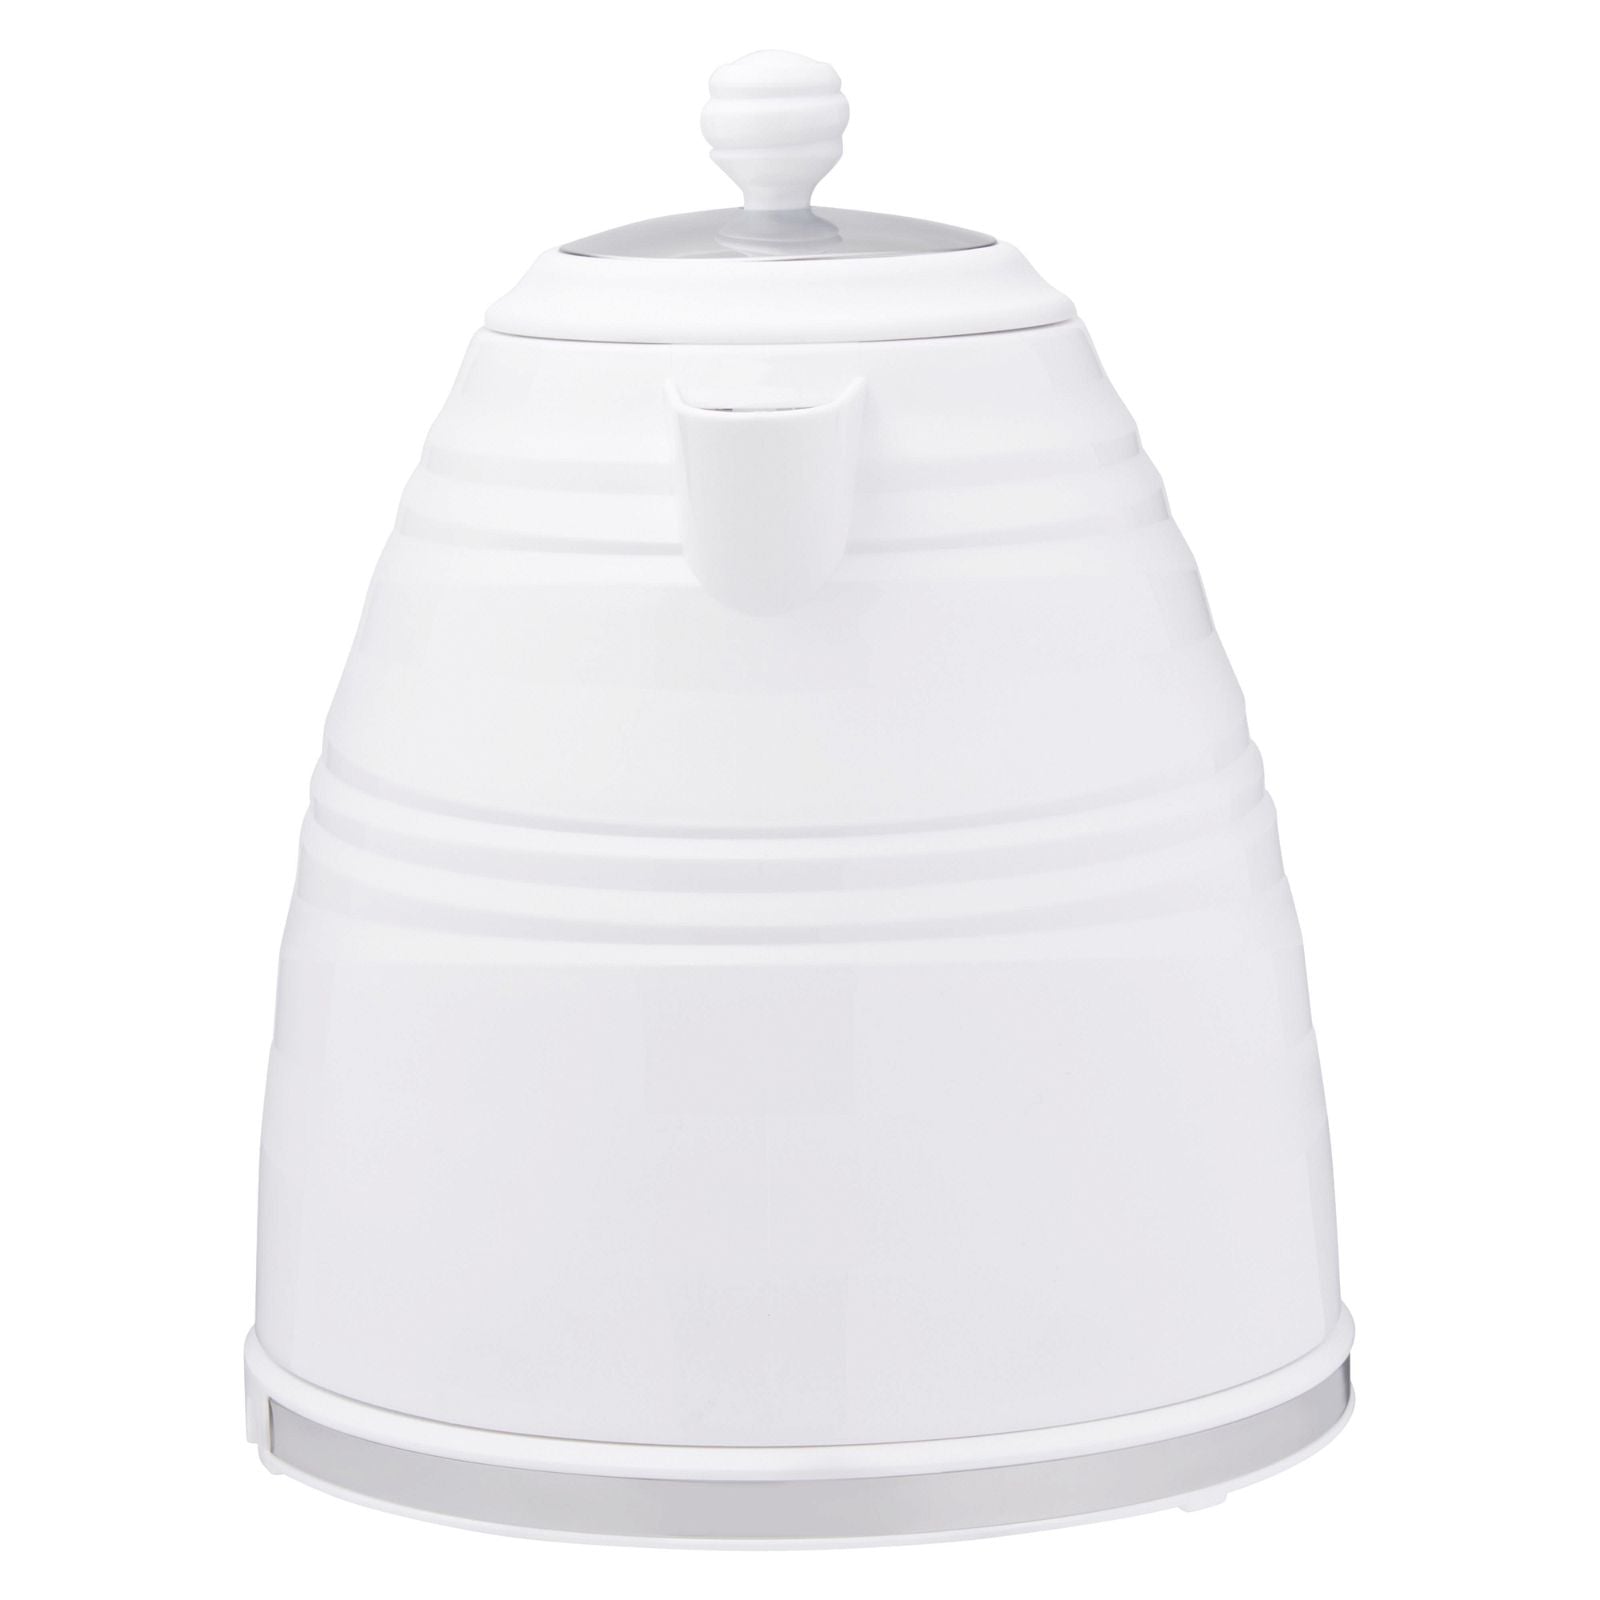 Westinghouse Kettle and Toaster Pack White Striped 1.7L Kettle, 2 Slice Toaster -  -  